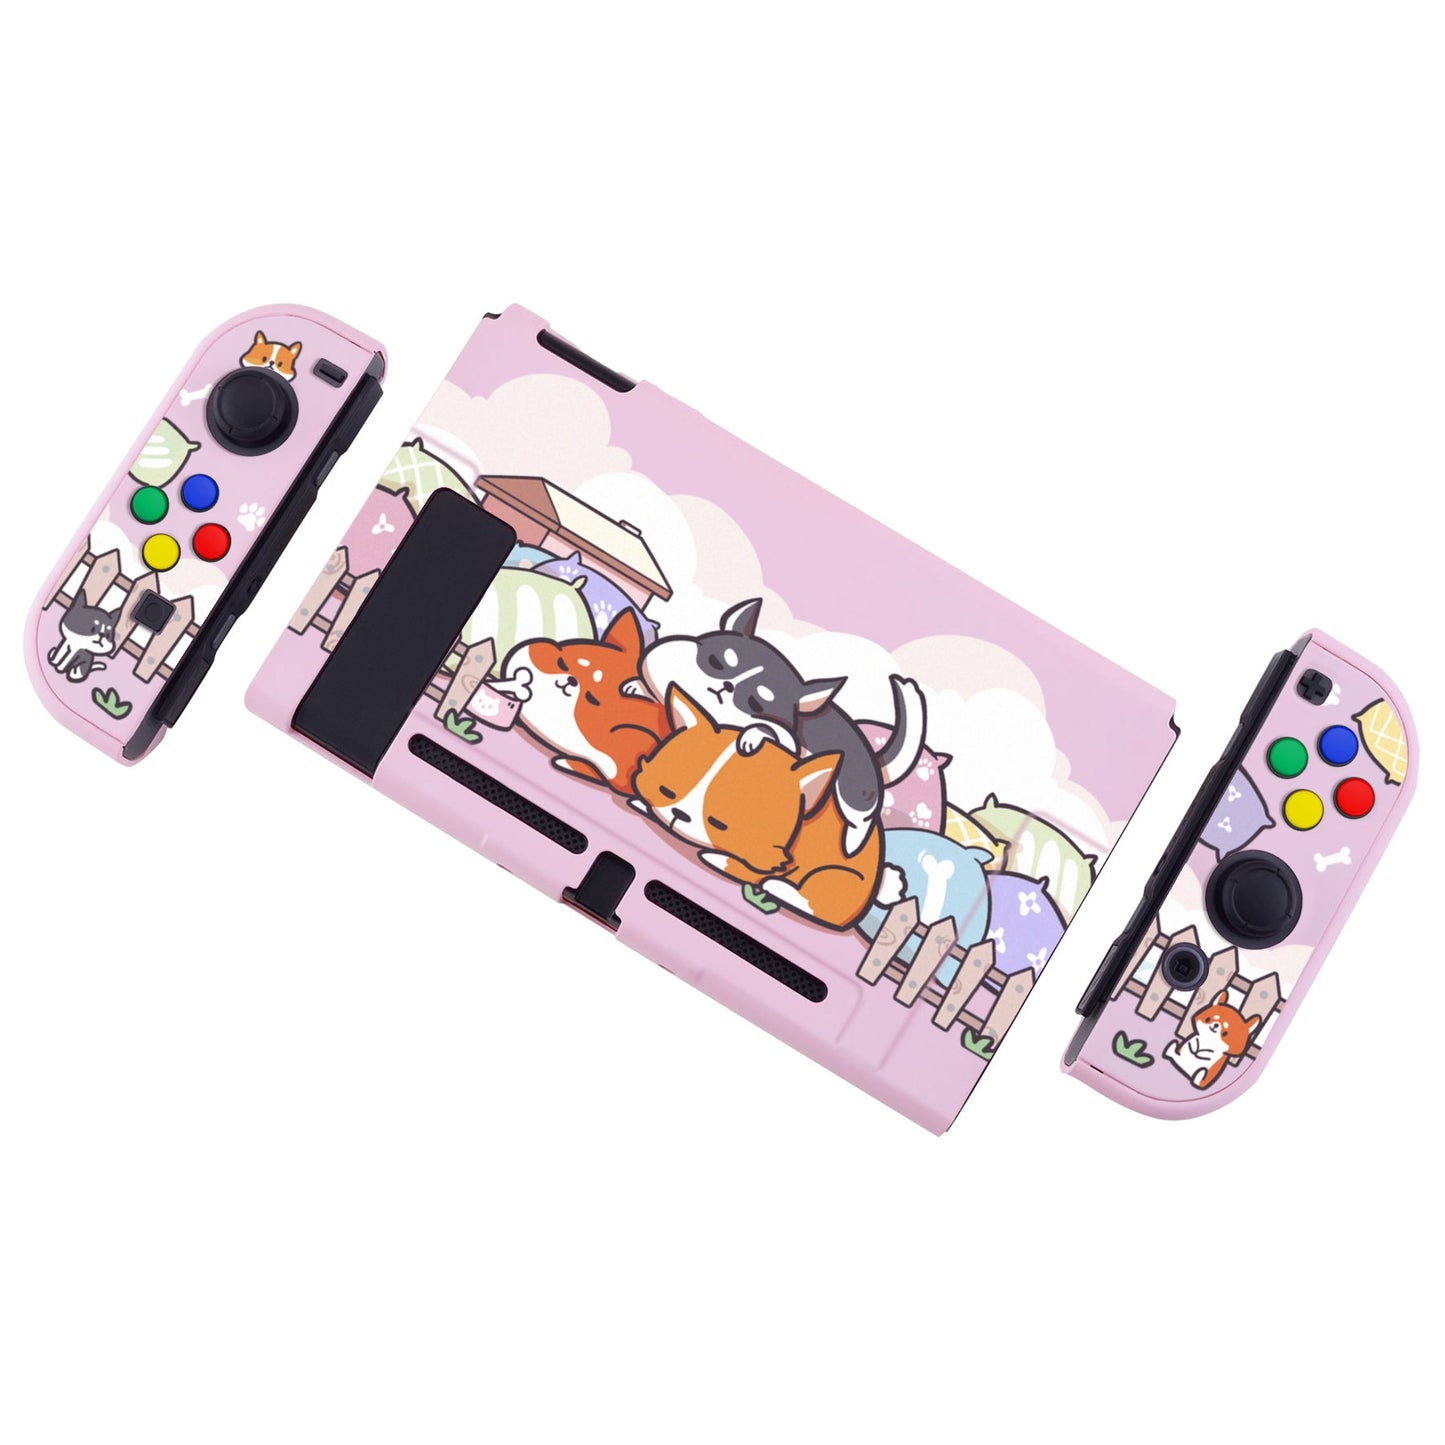 PlayVital Sleeping Shiba Inu Puppies Back Cover for NS Switch Console, NS Joycon Handheld Controller Separable Protector Hard Shell, Dockable Protective Case with Colorful ABXY Direction Button Caps - NTT111 PlayVital